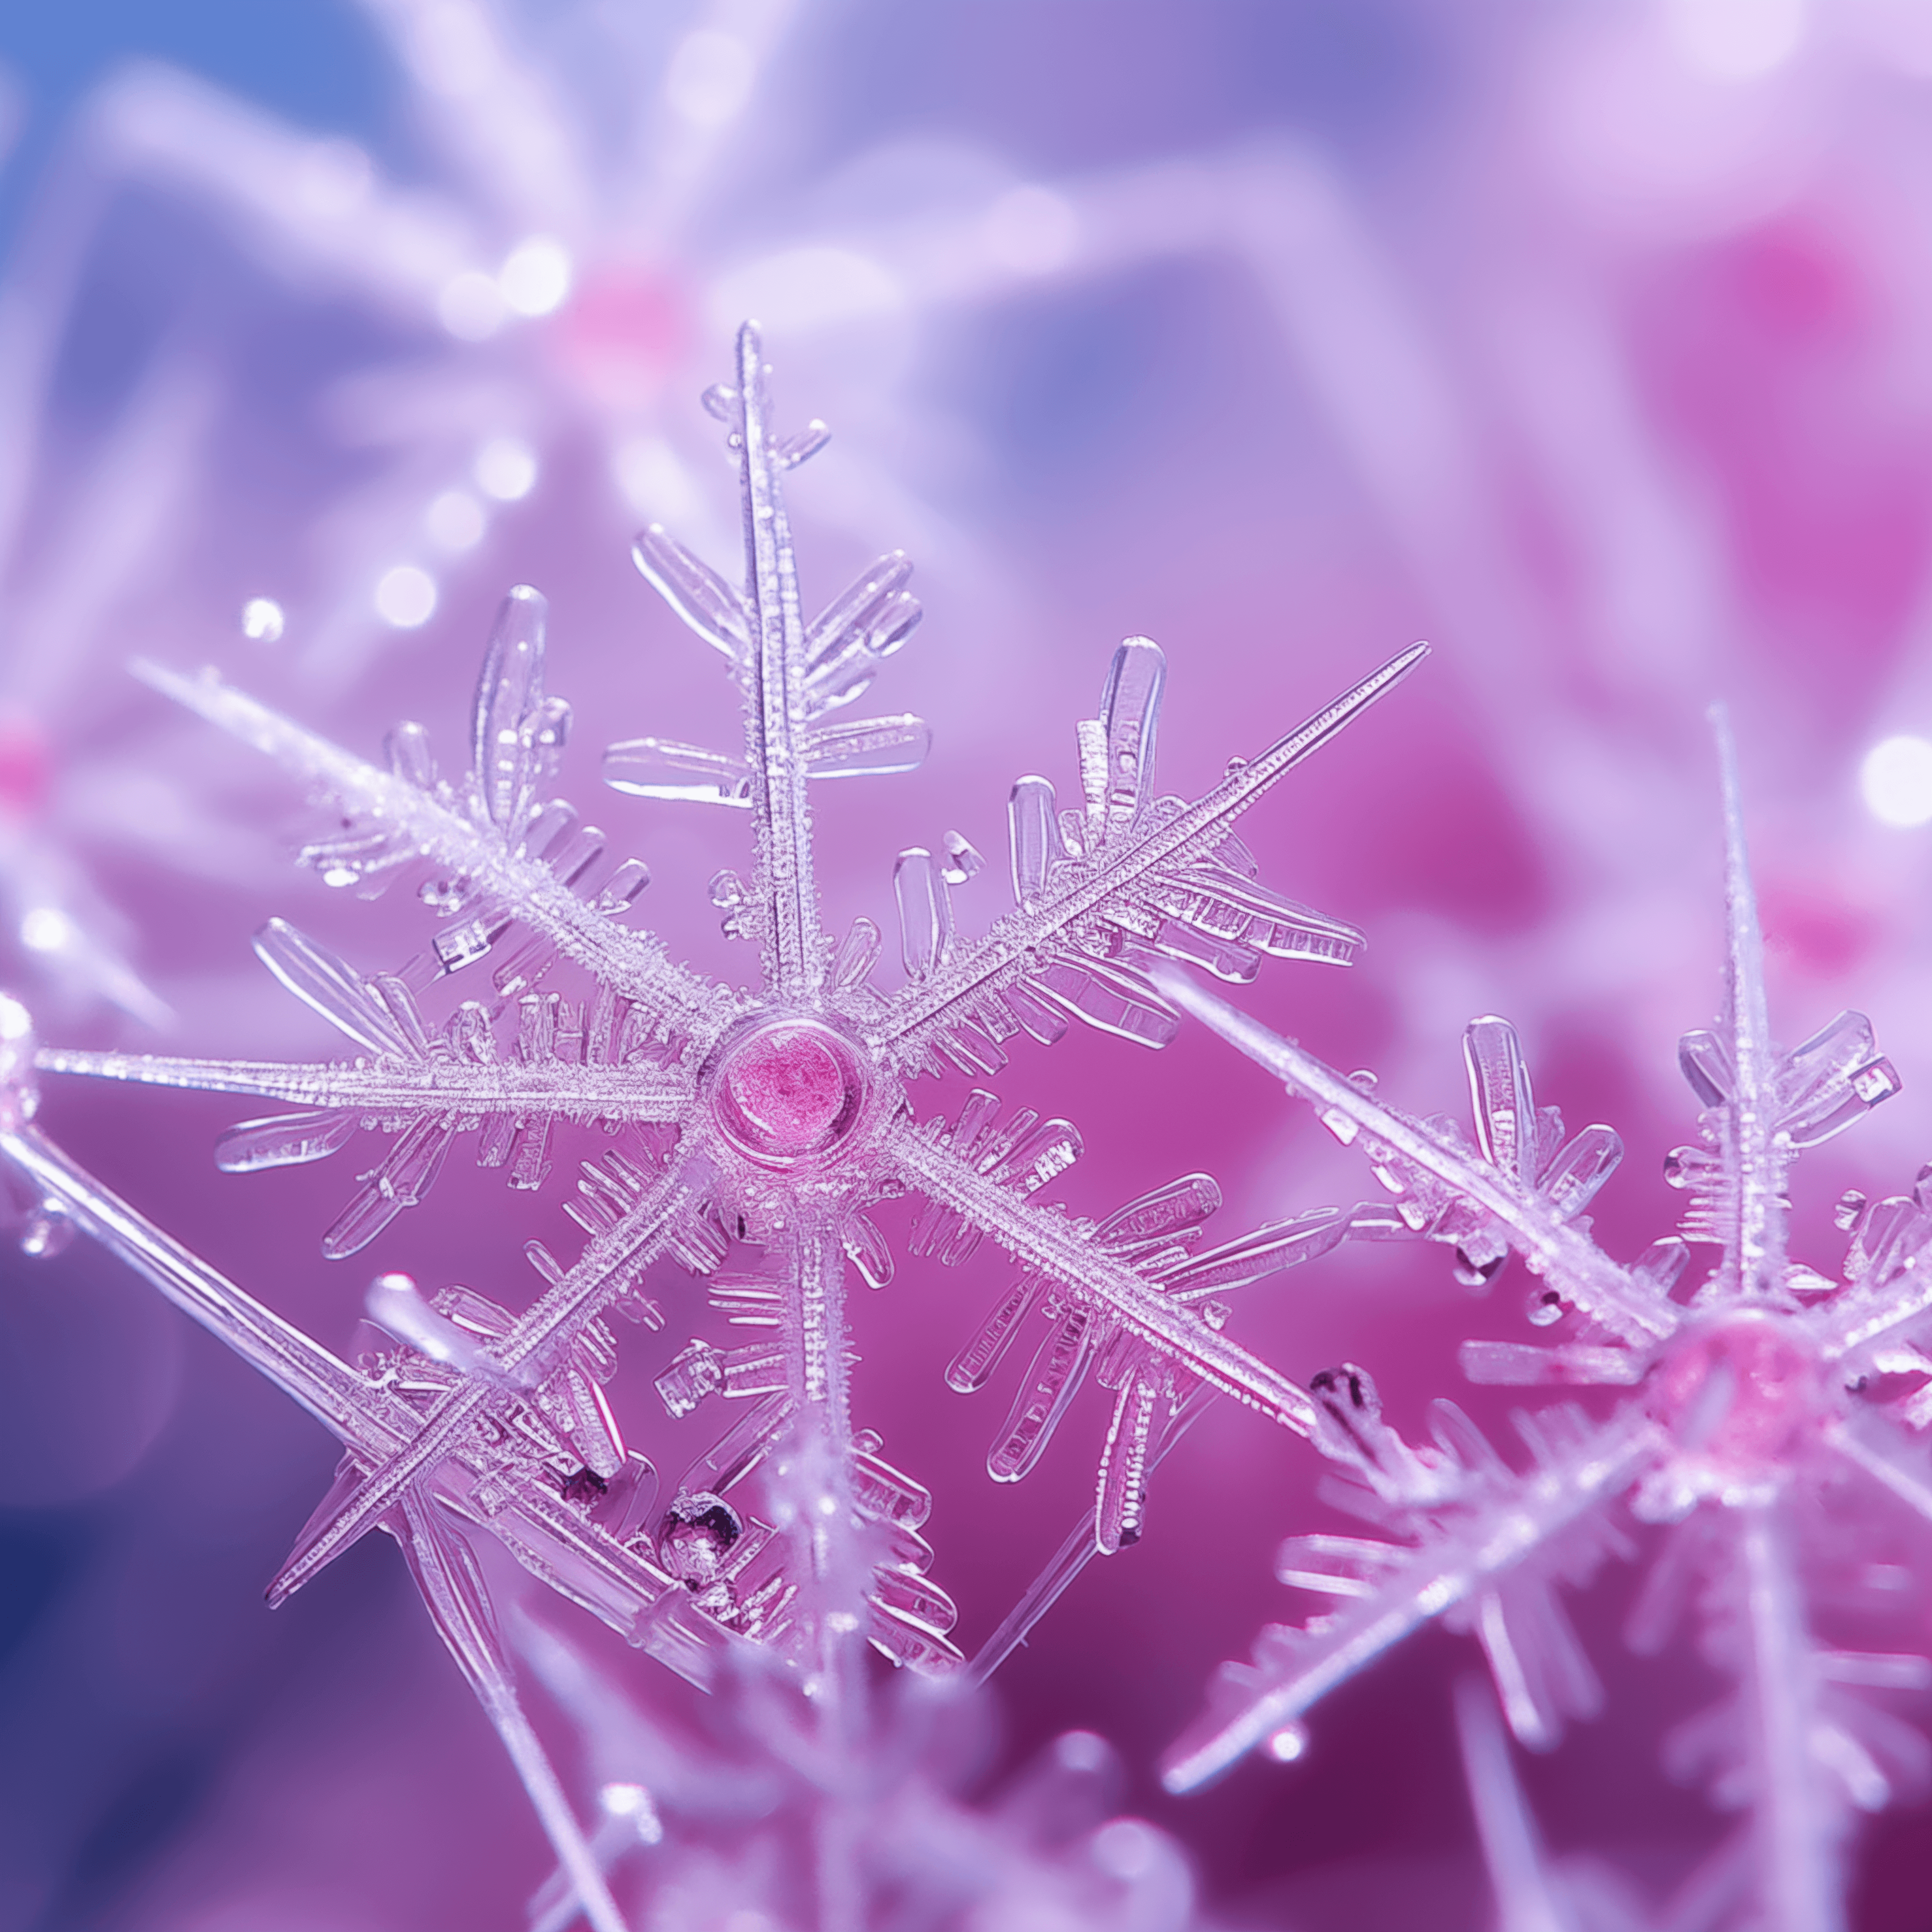 Each software solution can be a unique snowflake.